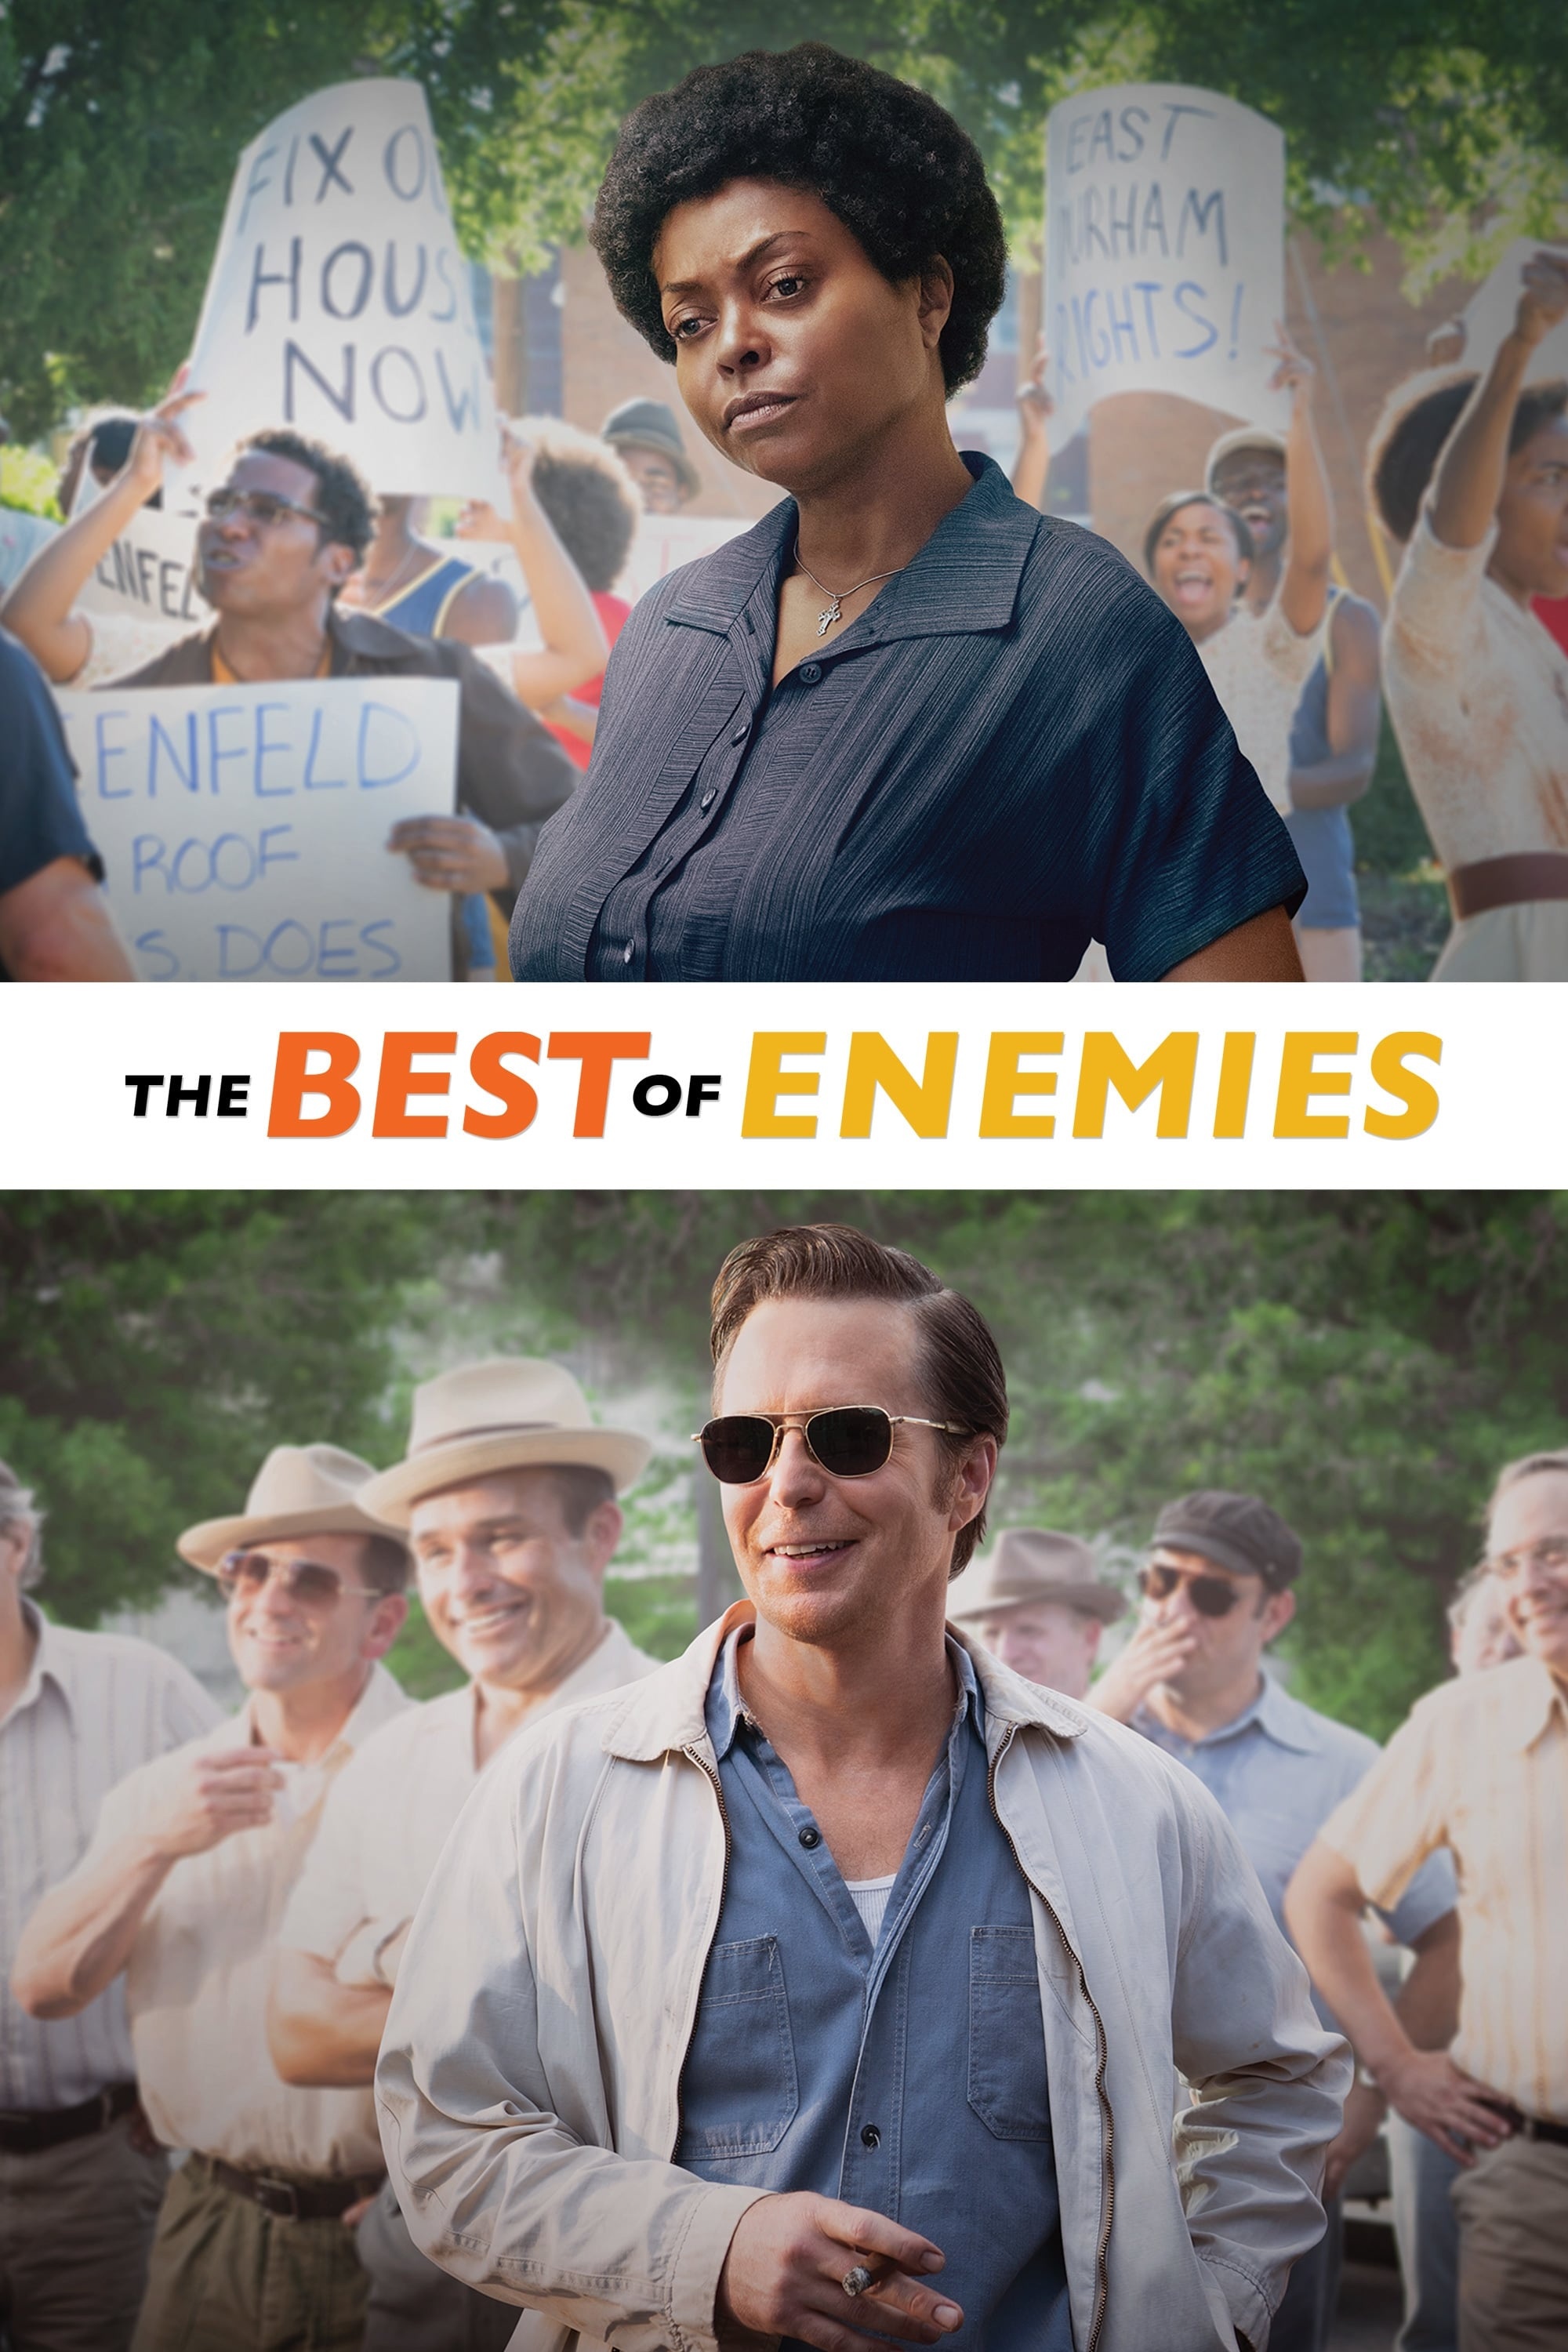 The Best of Enemies 2019, Posters, Civil rights activist, Interracial friendship, 2000x3000 HD Handy